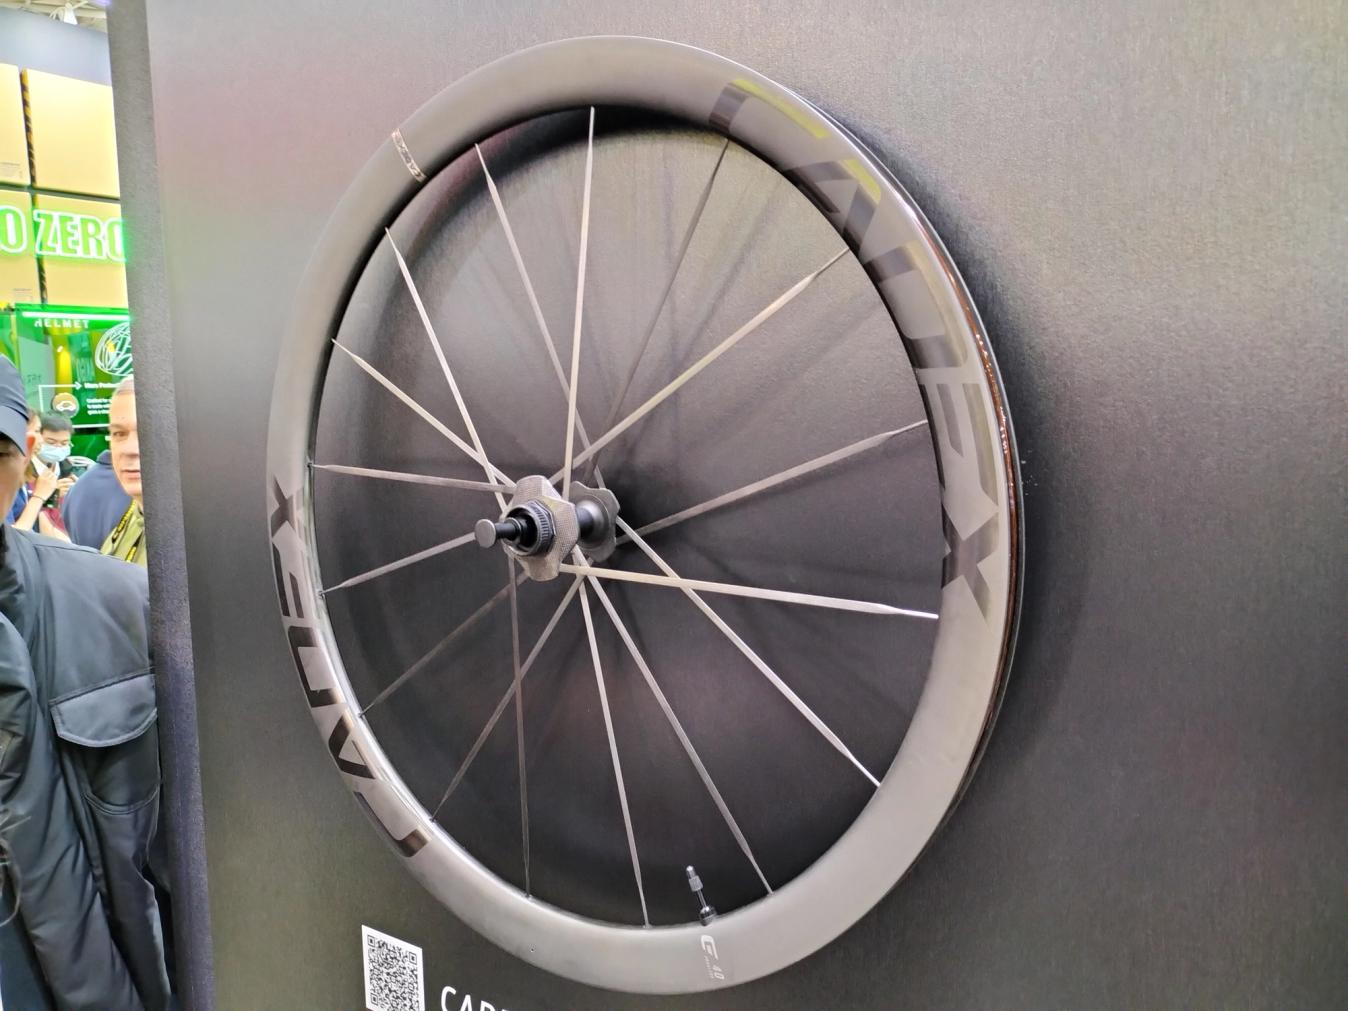 Giant and its in-house brands have been busy developing new products, including these new Cadex Max 40 wheels 